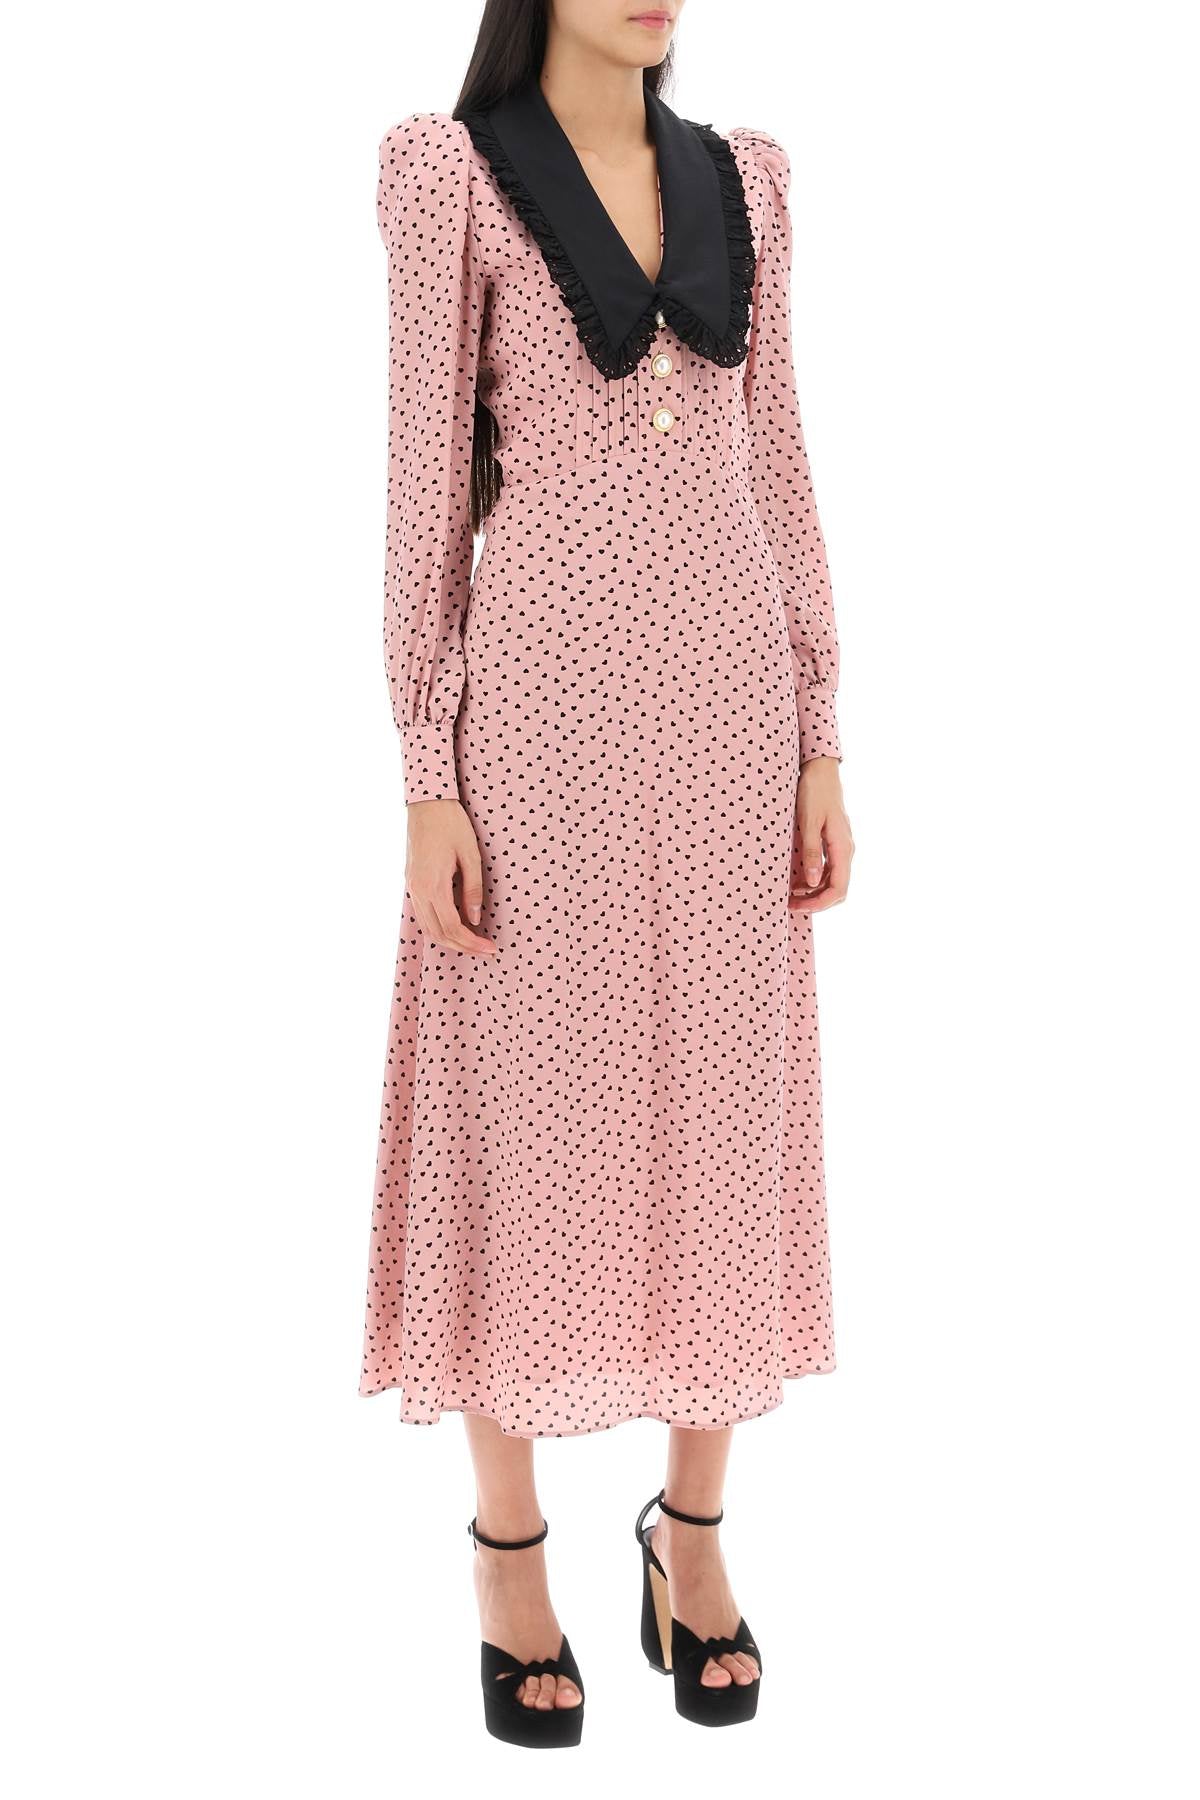 Alessandra rich midi dress with contrasting collar-women > clothing > dresses > midi-Alessandra Rich-38-Mixed colours-Urbanheer